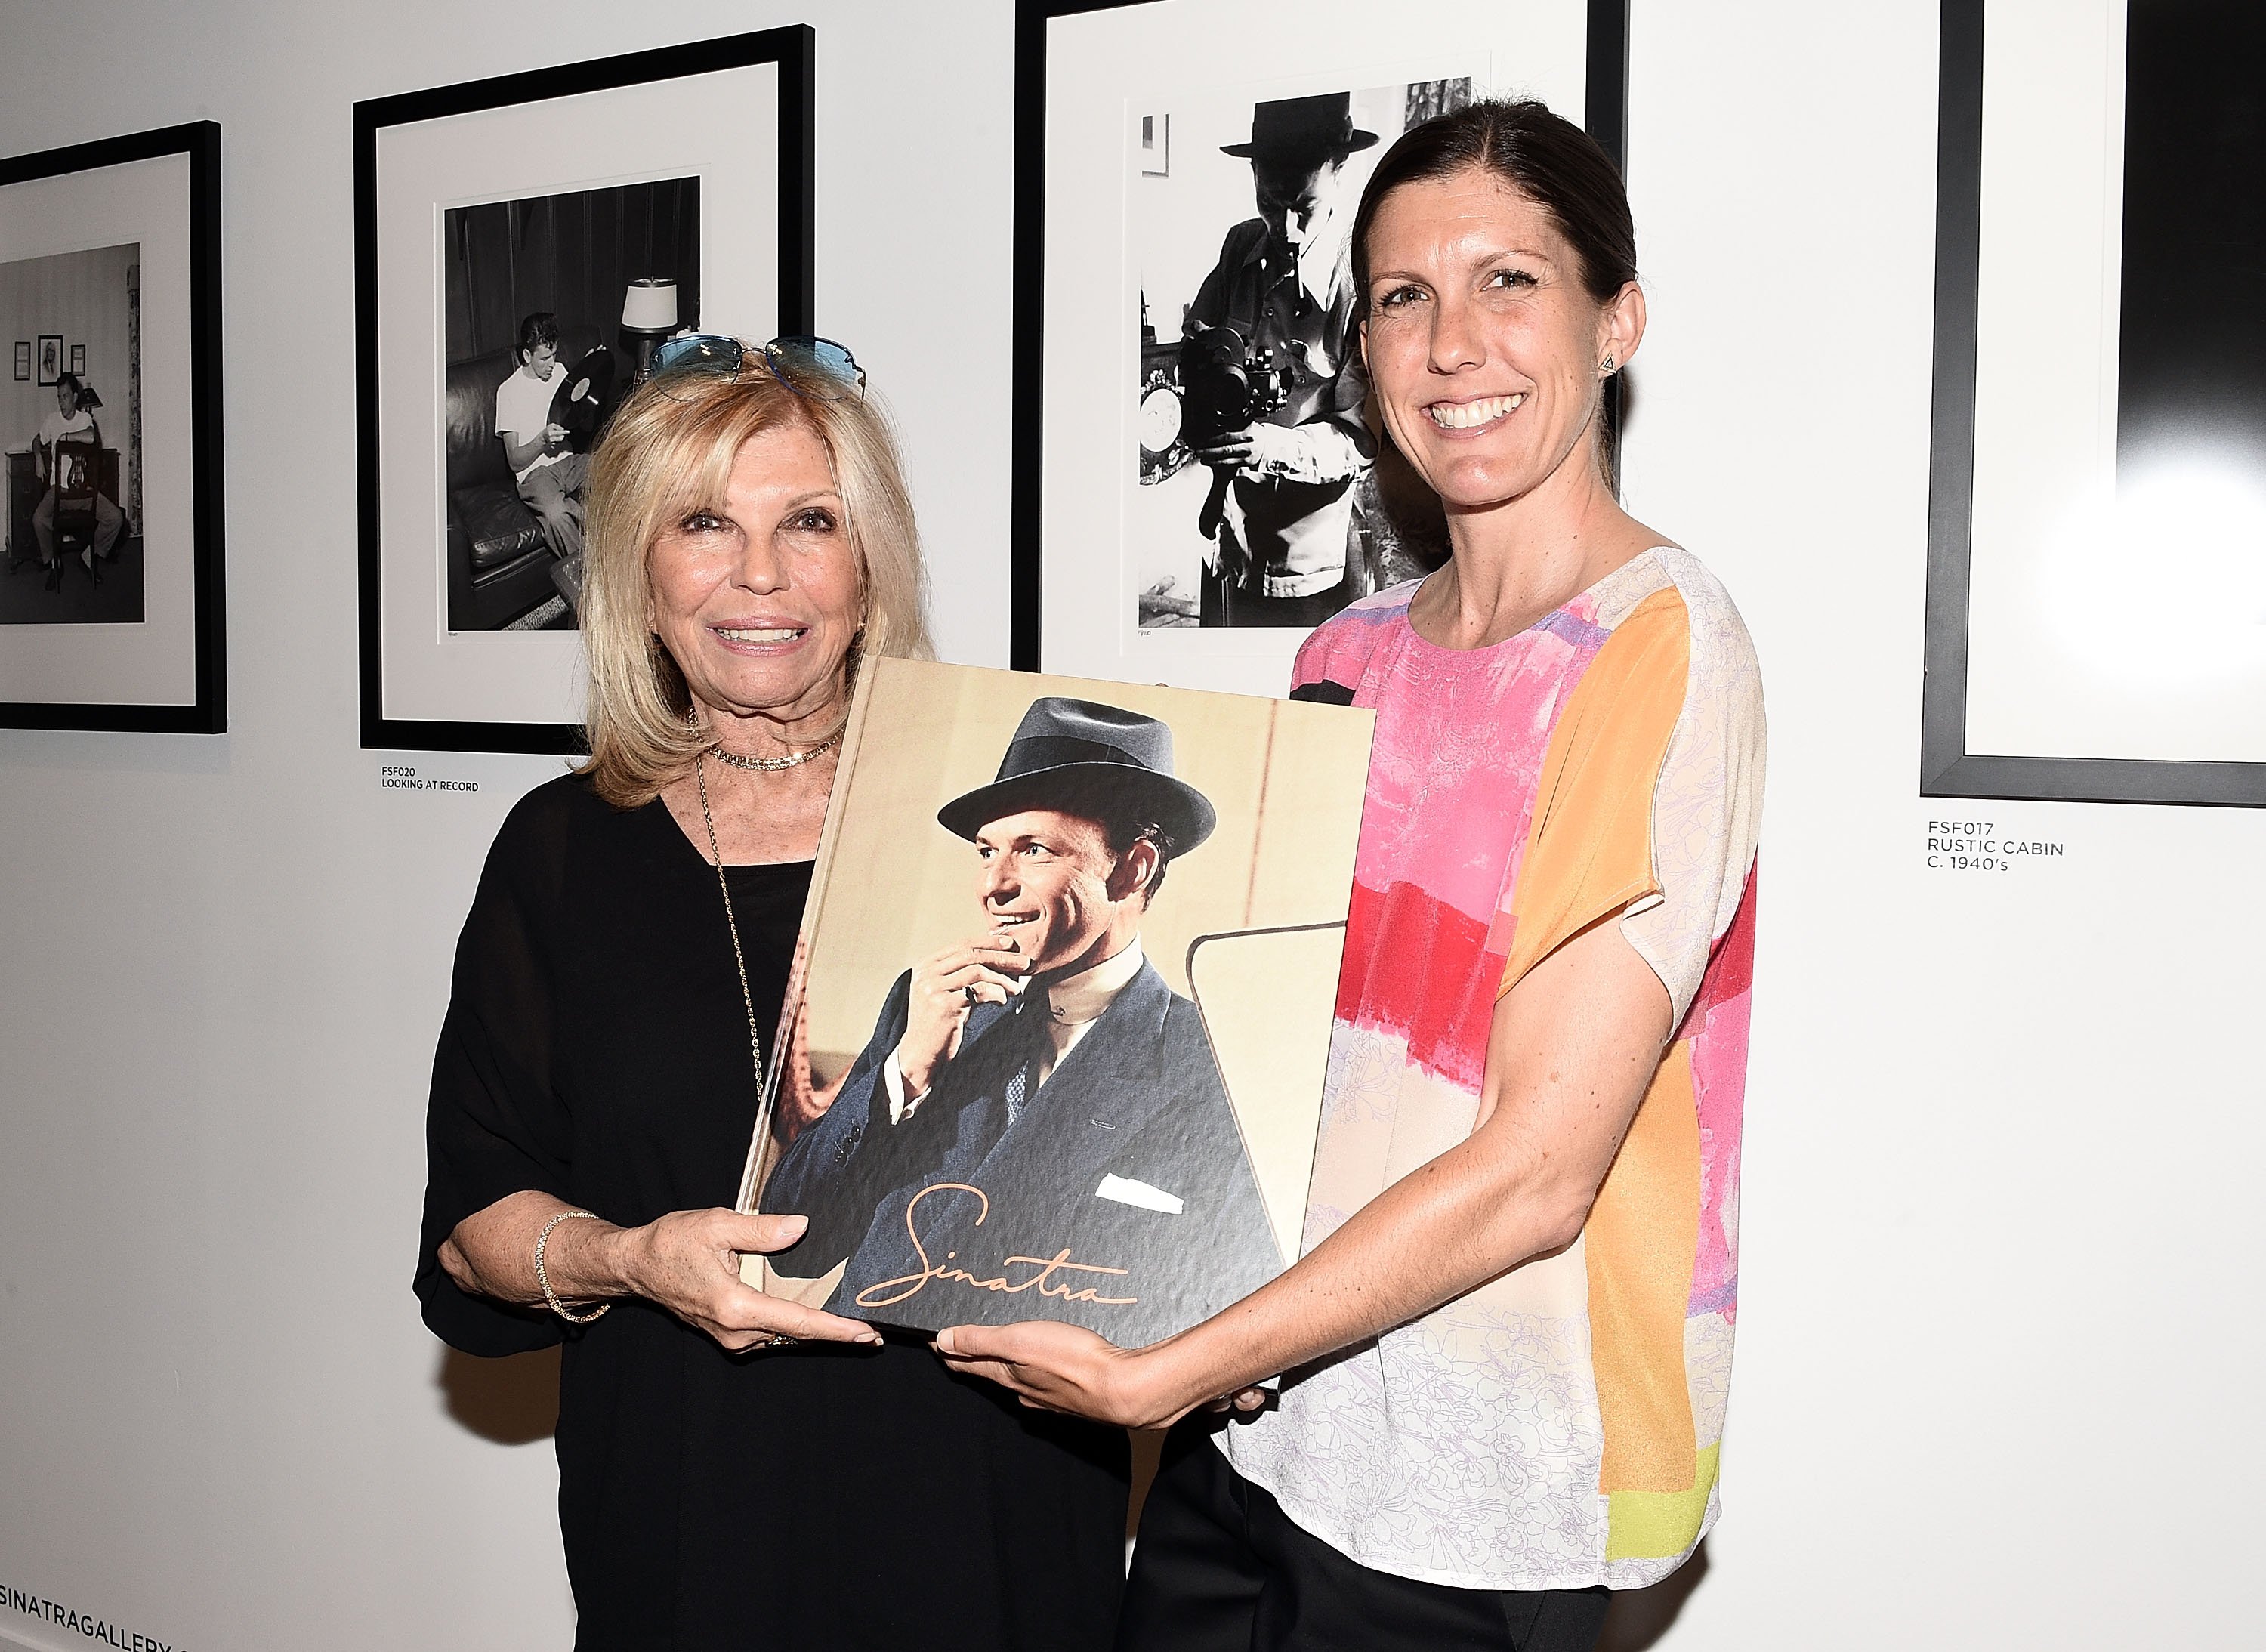 Nancy Sinatra and Amanda Erlinger attend the "Sinatra" book launch event at Saks Fifth Avenue on July 23, 2015 in New York City. | Source: Getty Images